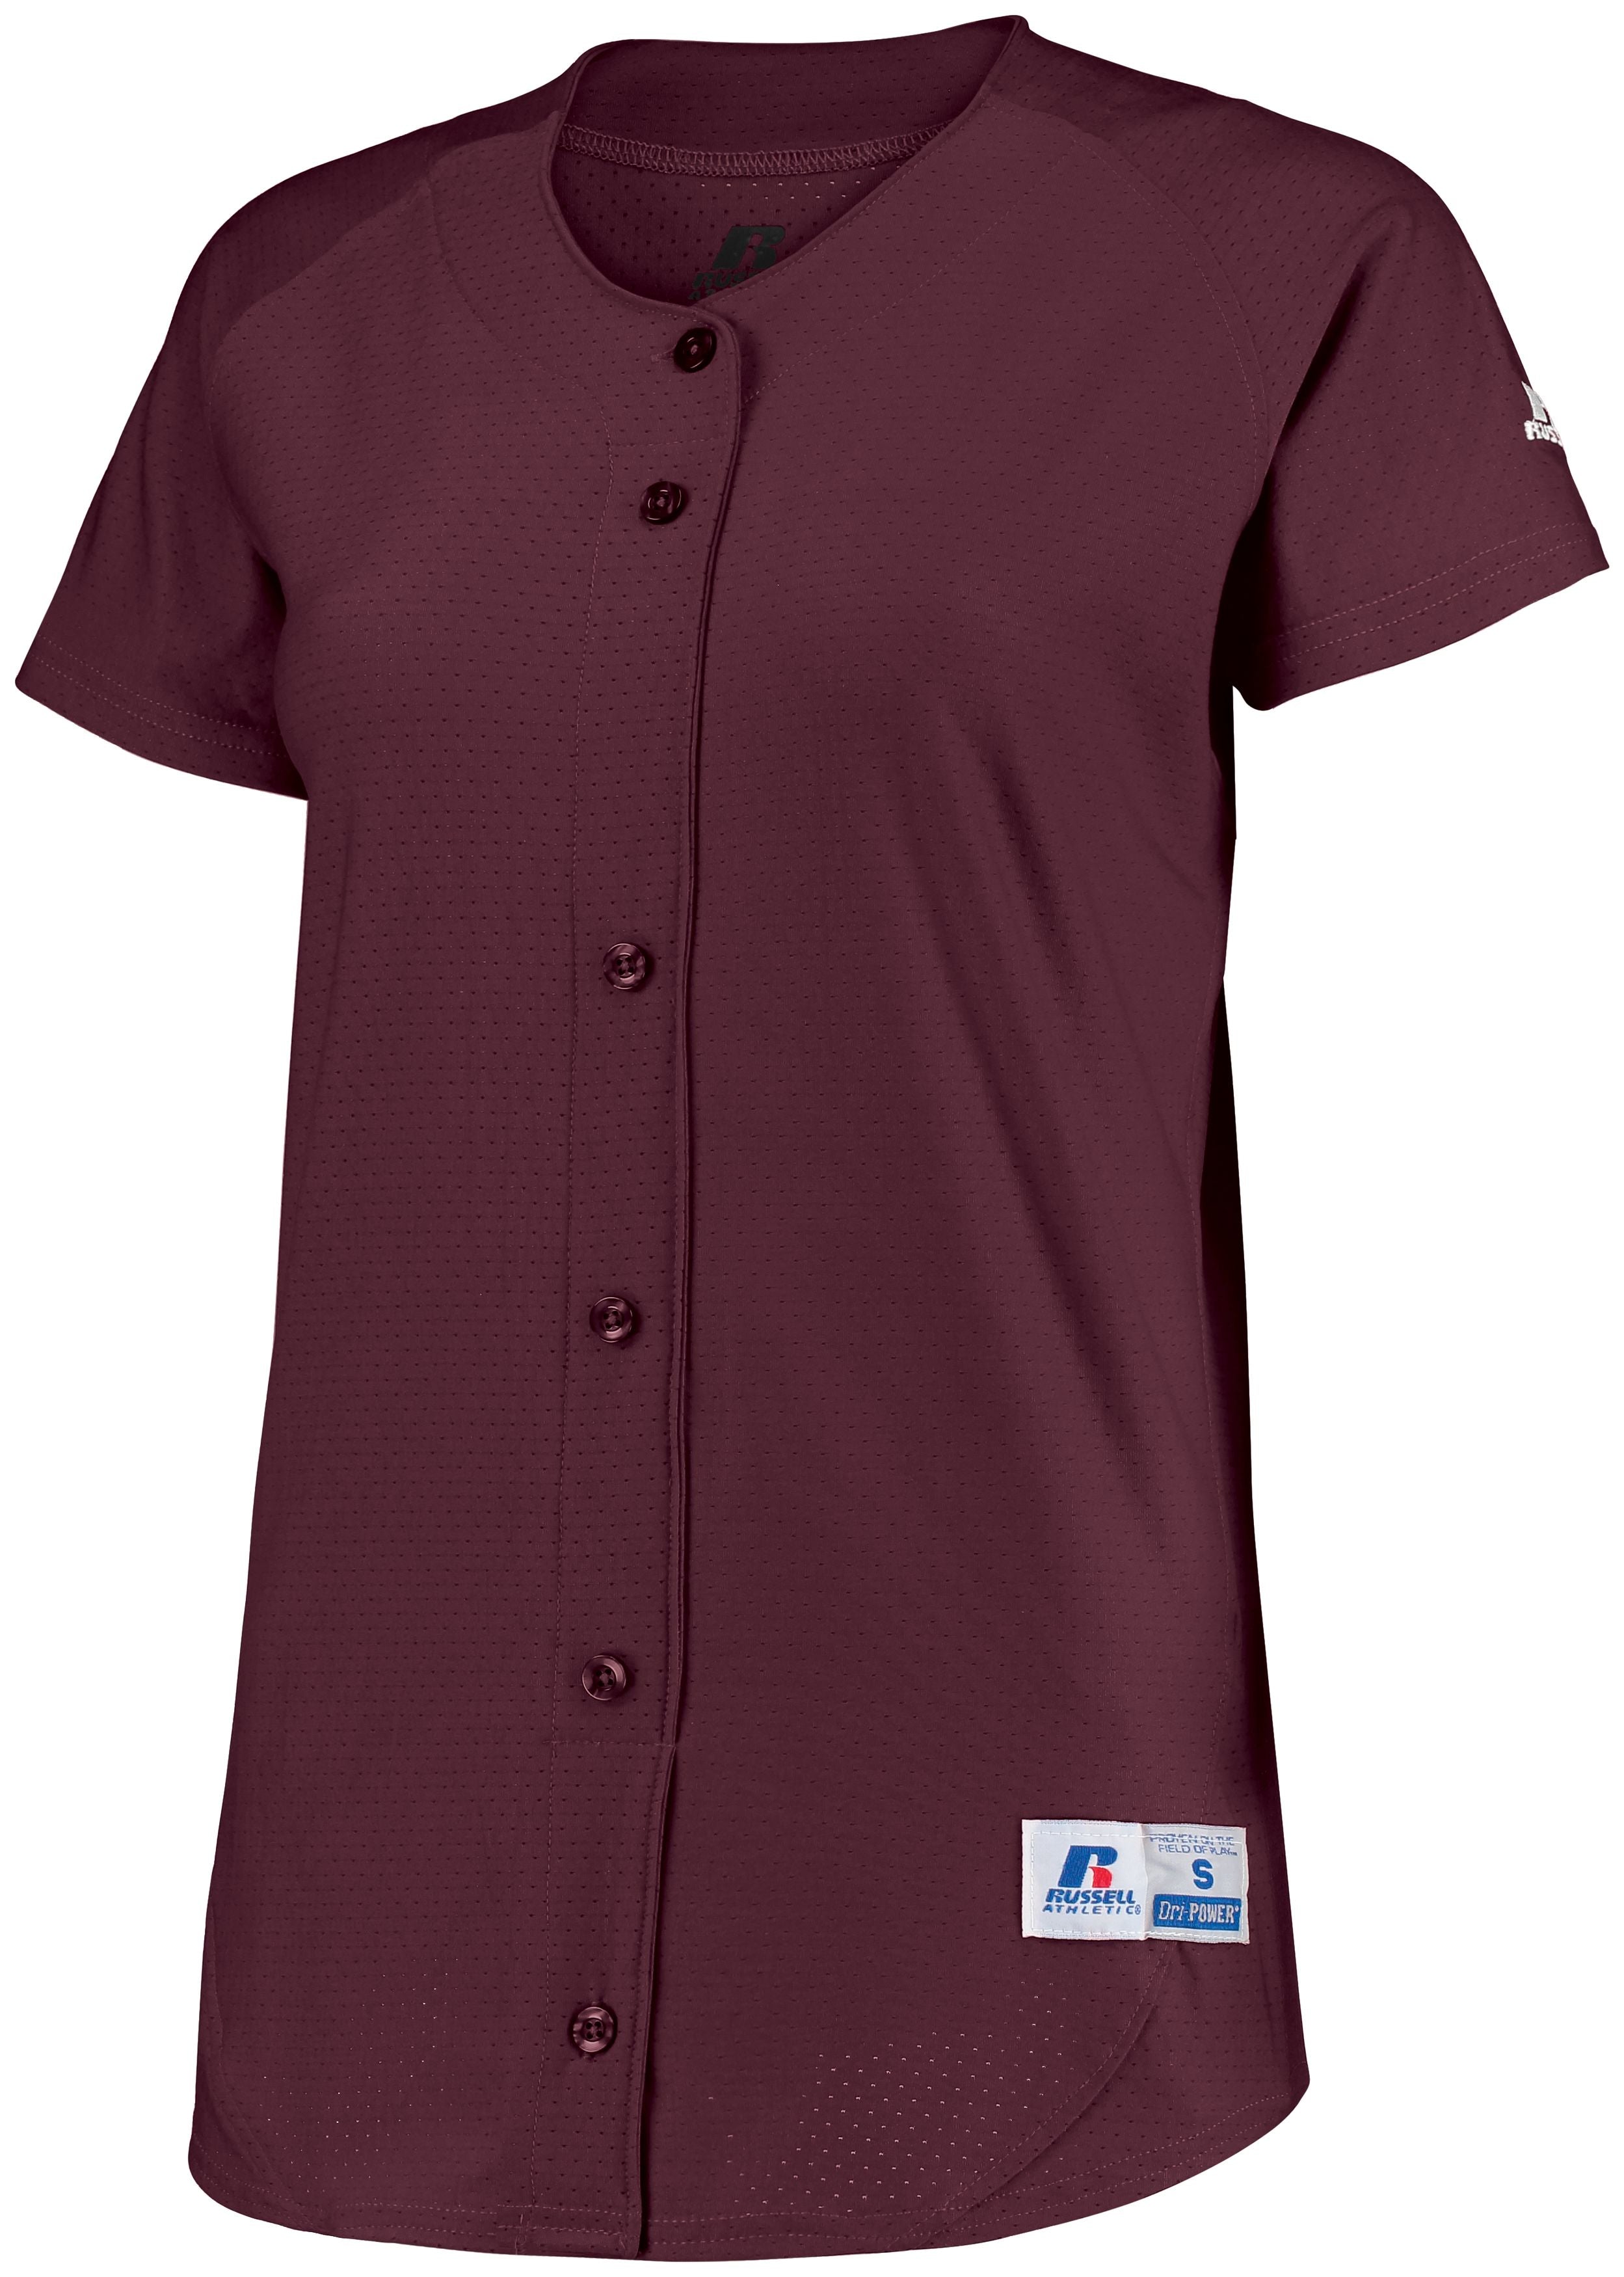 Russell Athletic Ladies Stretch Faux Button Jersey in Maroon  -Part of the Ladies, Ladies-Jersey, Softball, Russell-Athletic-Products, Shirts product lines at KanaleyCreations.com